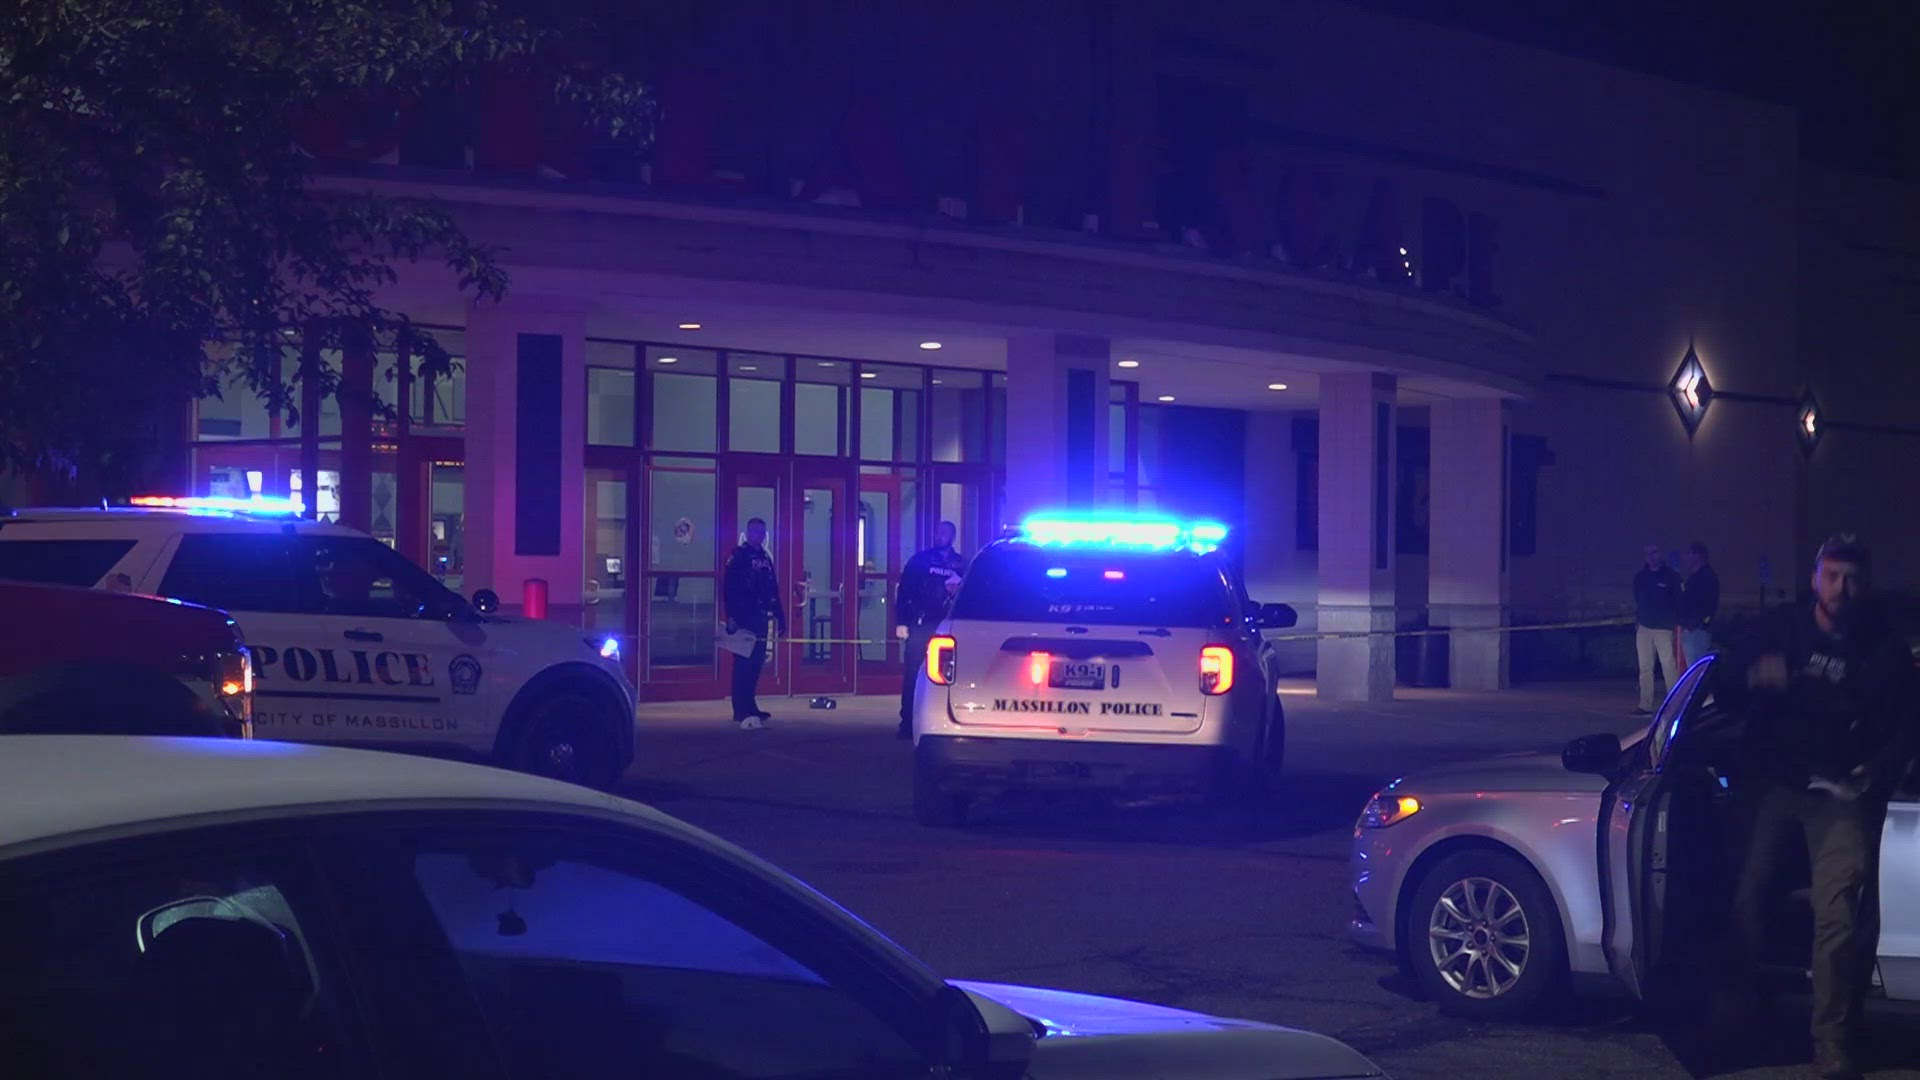 Eyewitnesses told 3News the shooting took place in the lobby of the theater. Police could later be seen escorting people from the building.